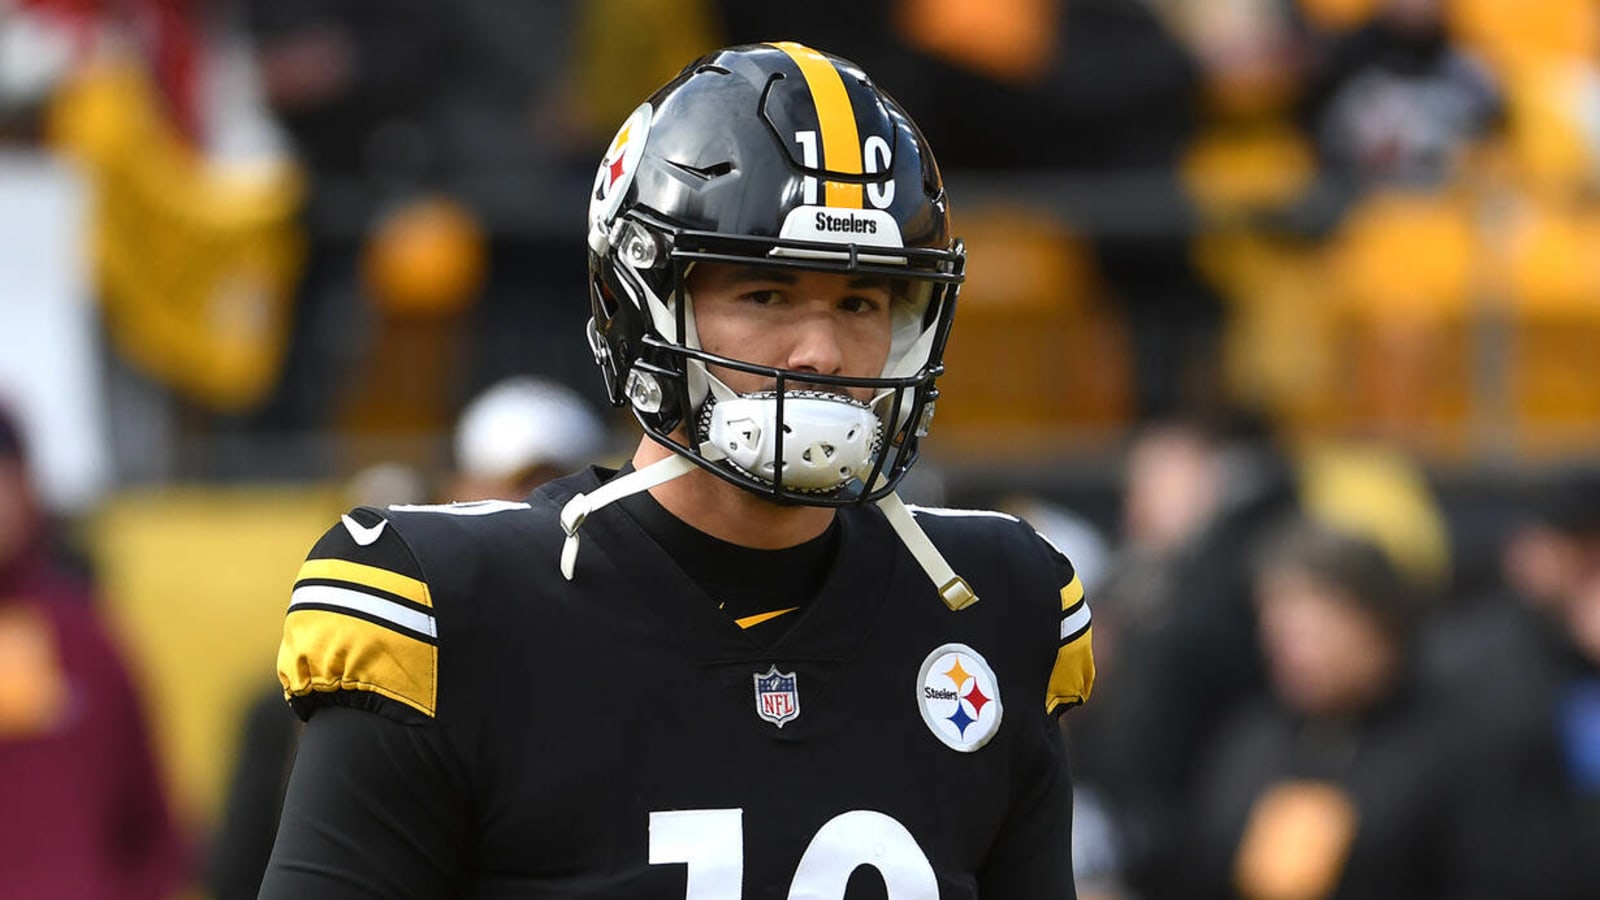 Could Steelers trade QB Mitchell Trubisky?